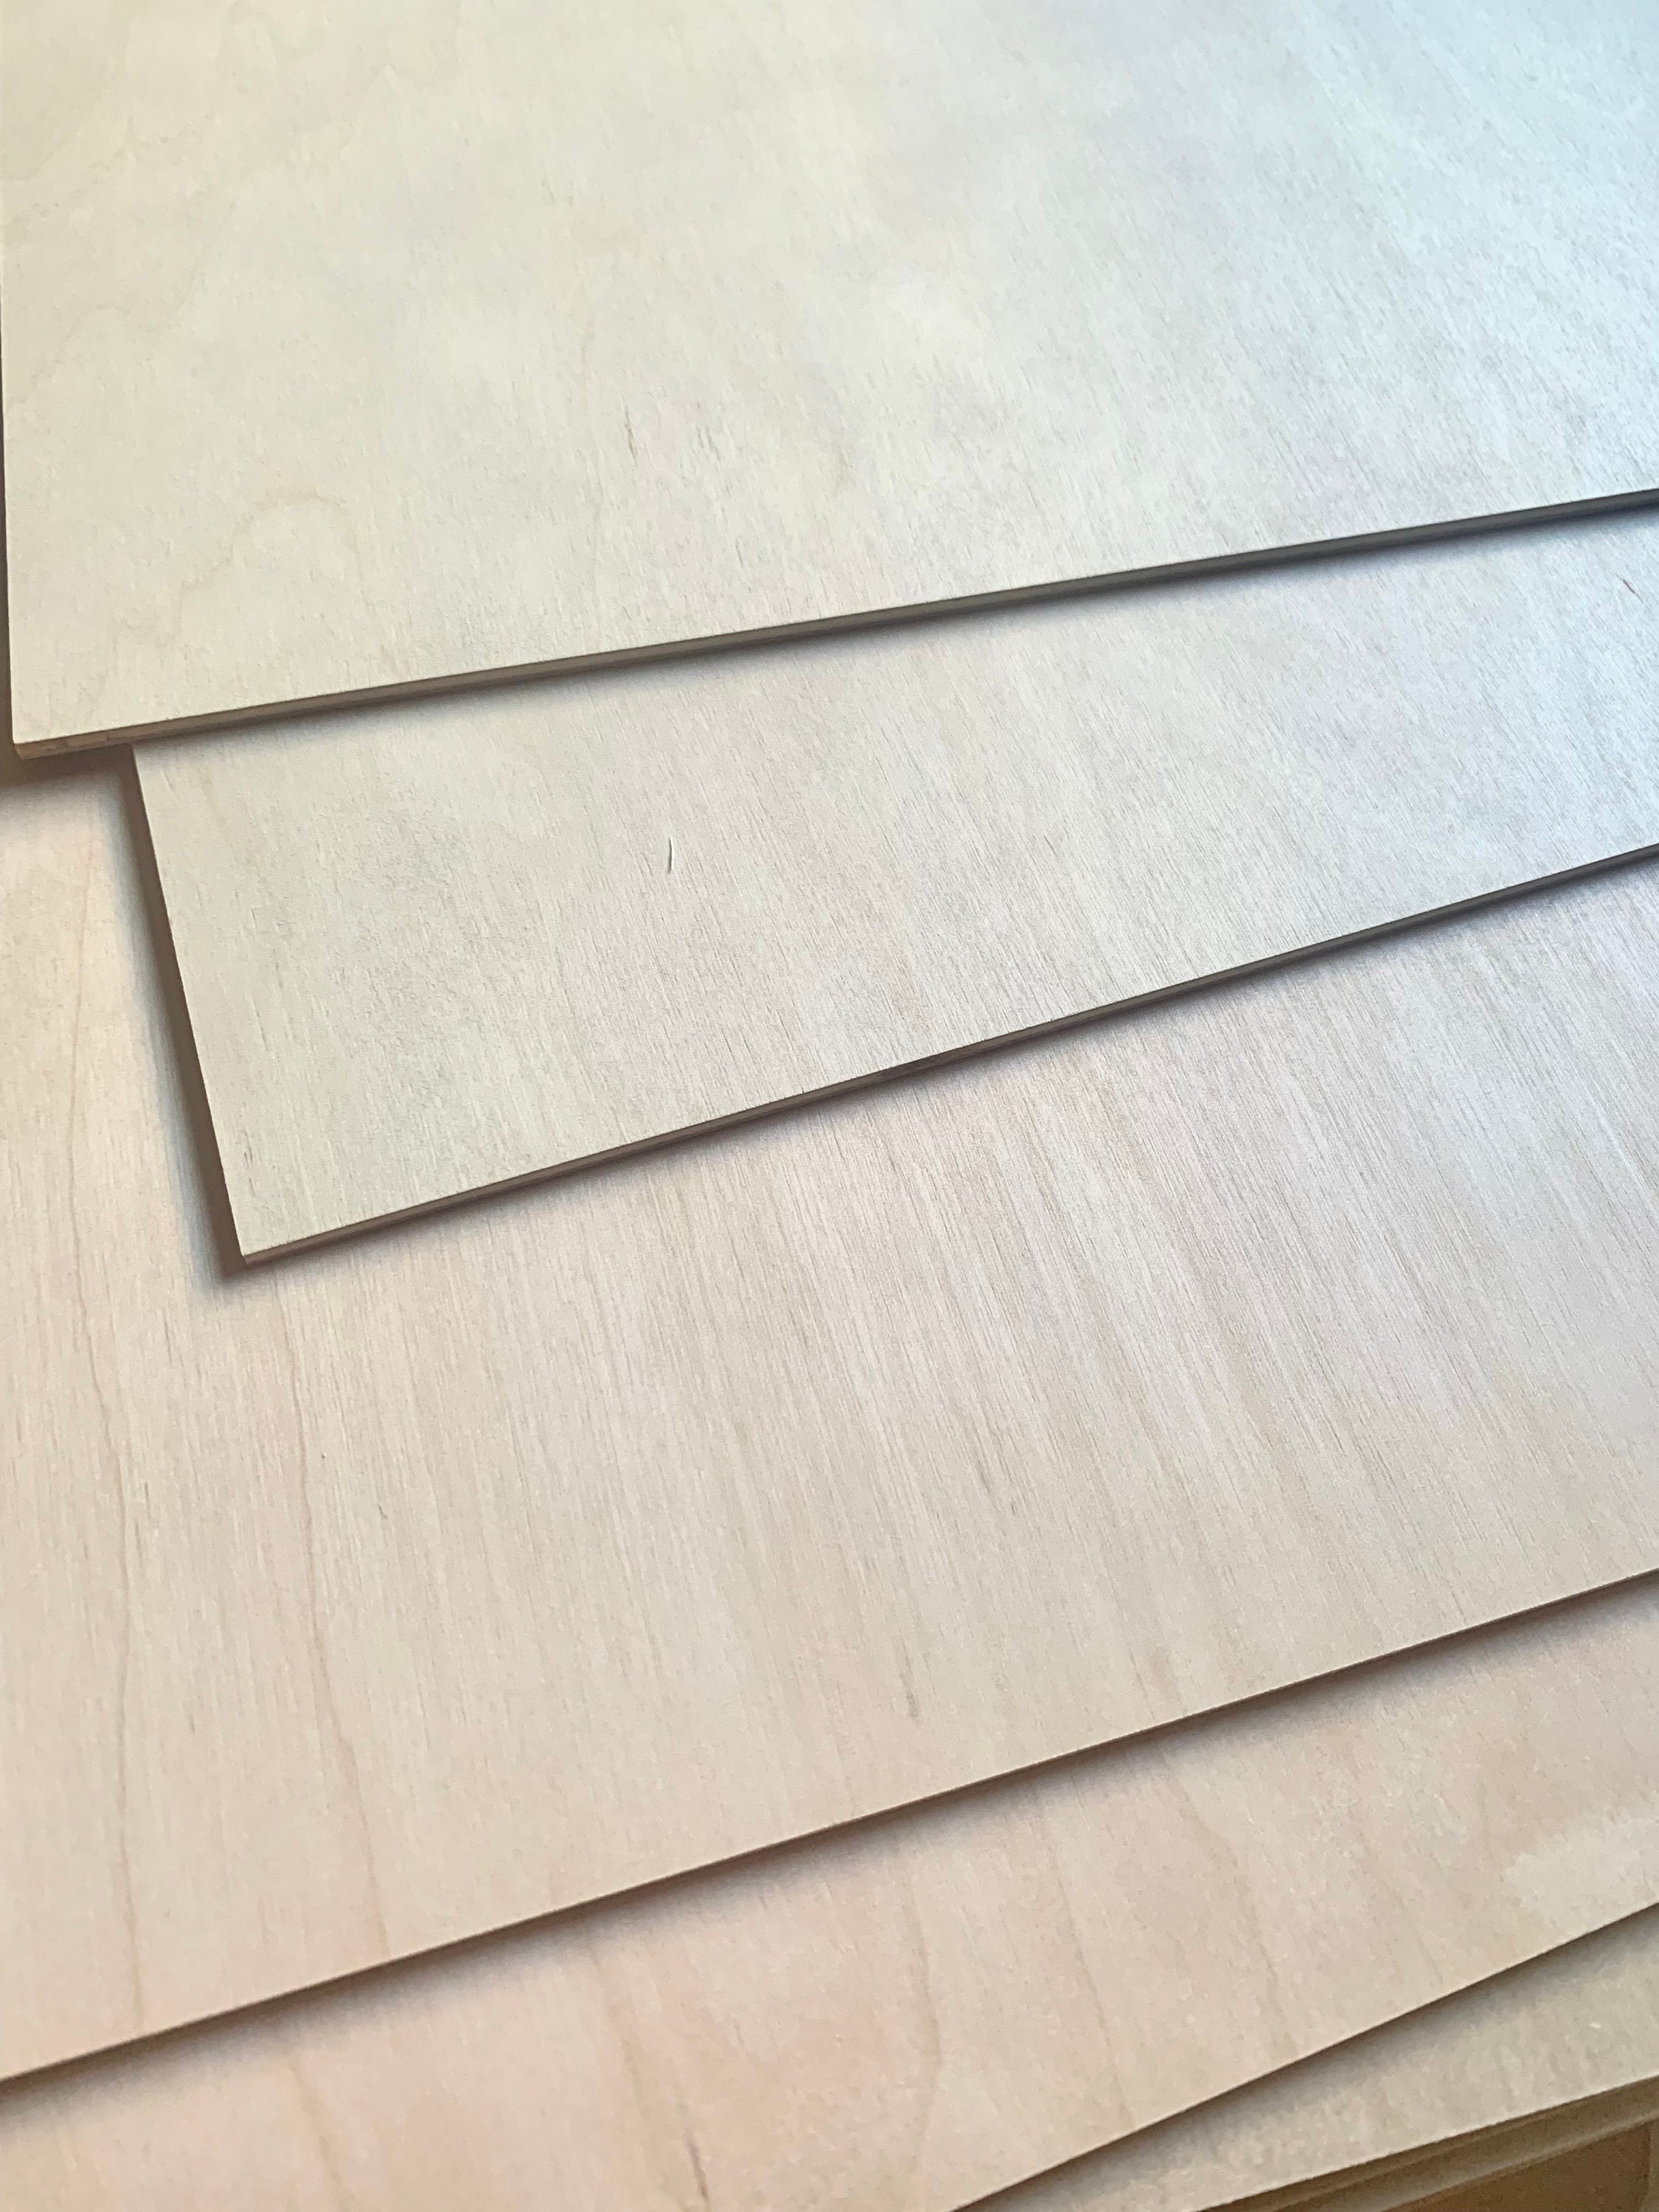 BALTIC BIRCH PLYWOOD 1/8 (3mm) BY APPROX 12 X 24 - 20 PIECES